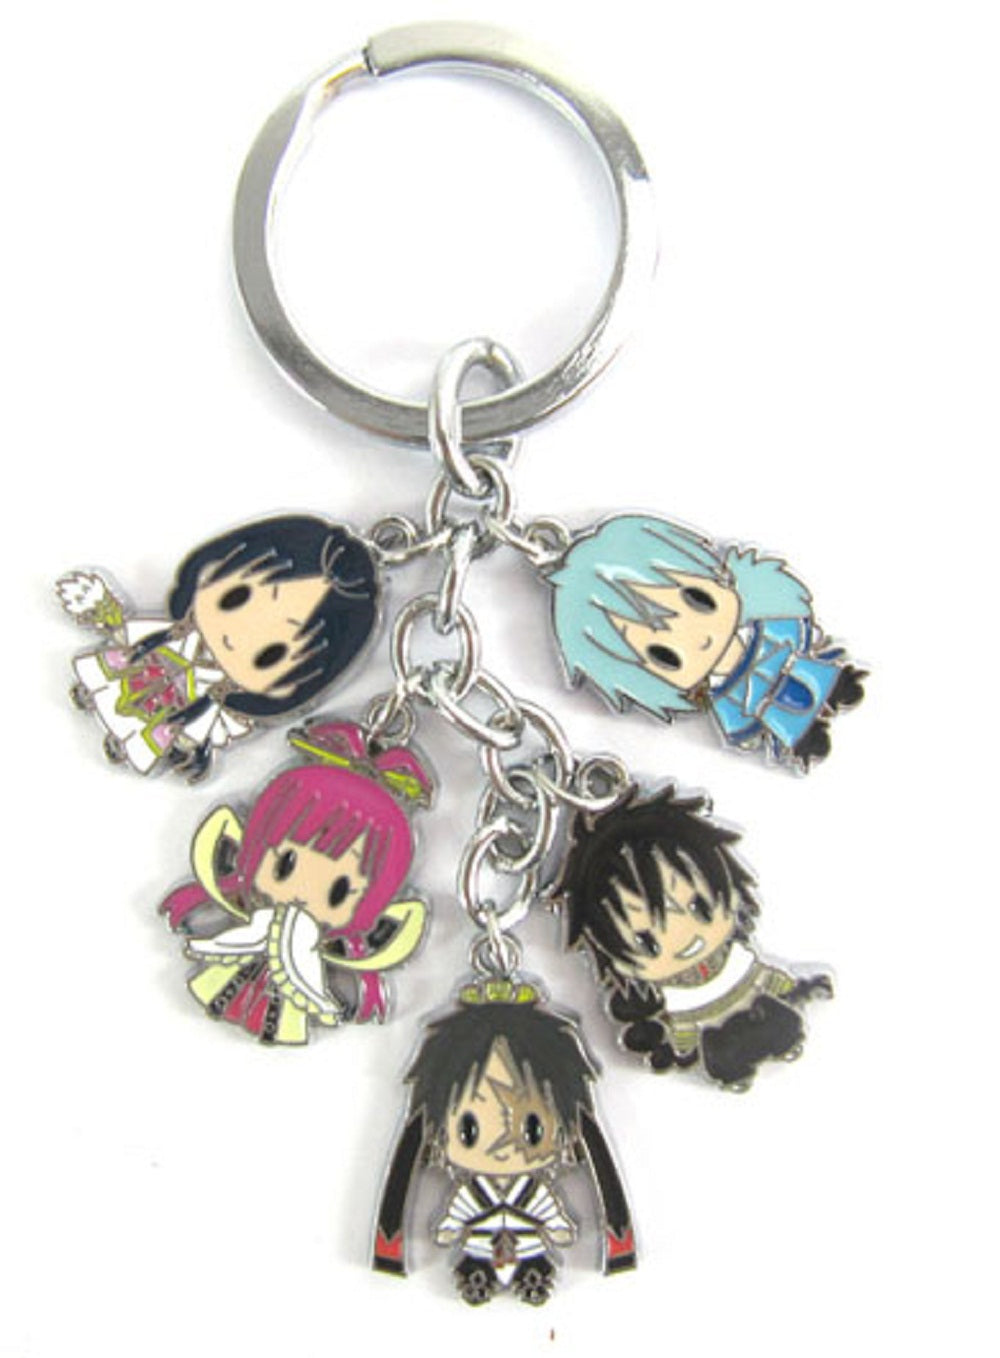 Magi Characters Keychain - Super Anime Store FREE SHIPPING FAST SHIPPING USA